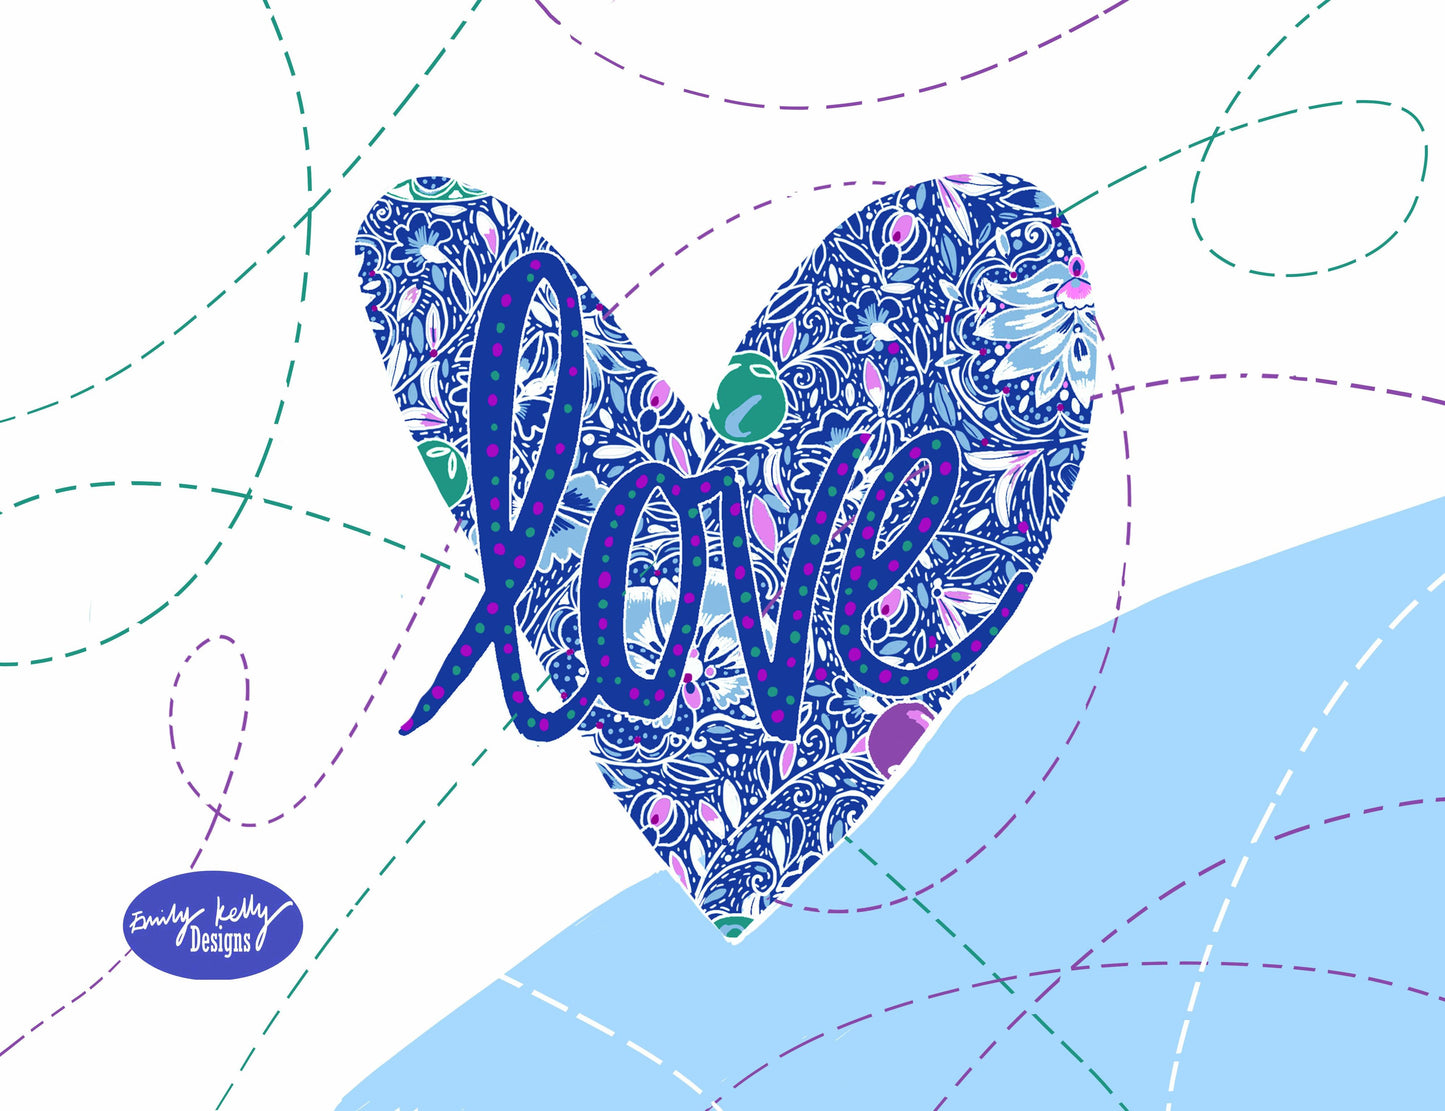 "Love" by Emily Kelly - Print